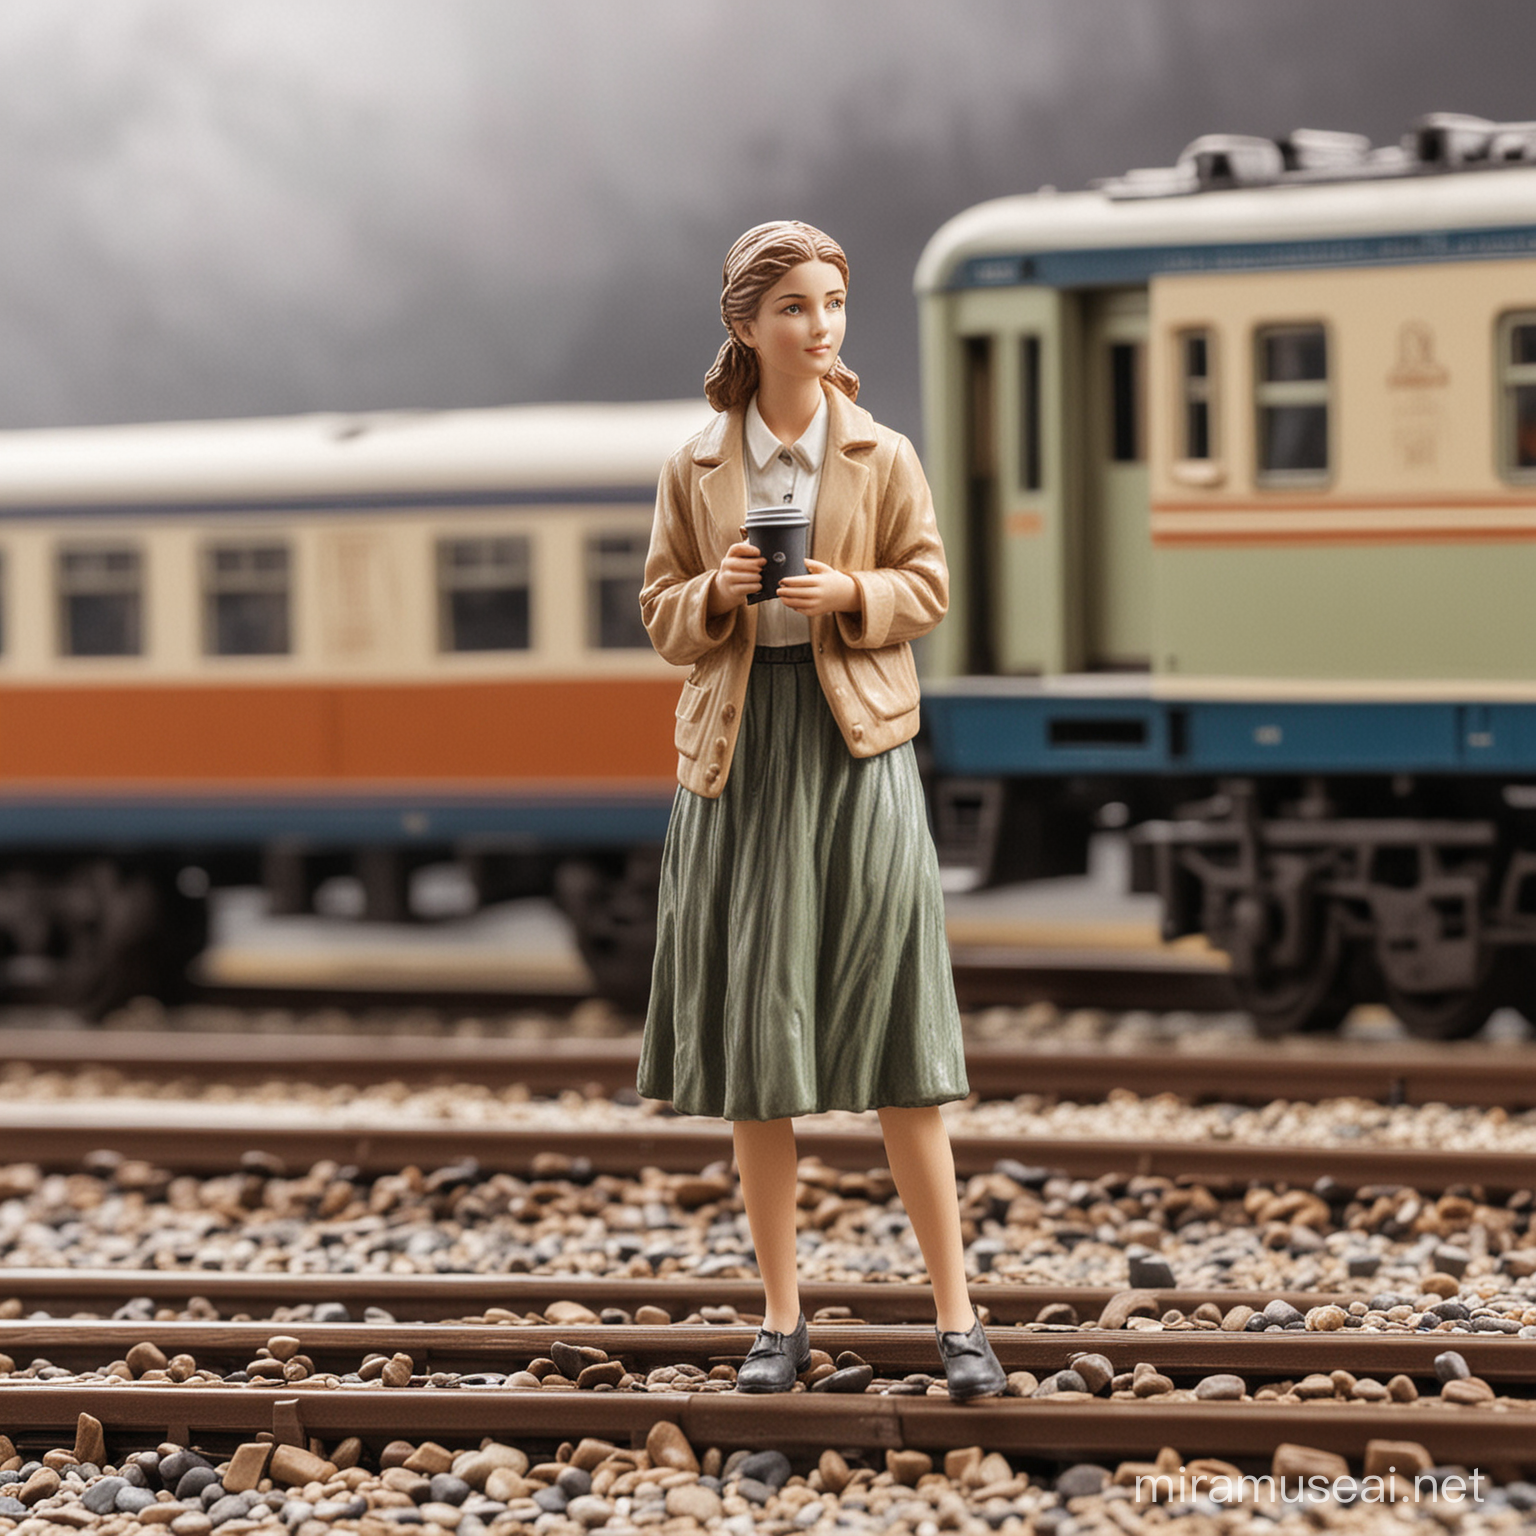 figurine of a young WOMEN with a coffee in hand in front of a train

